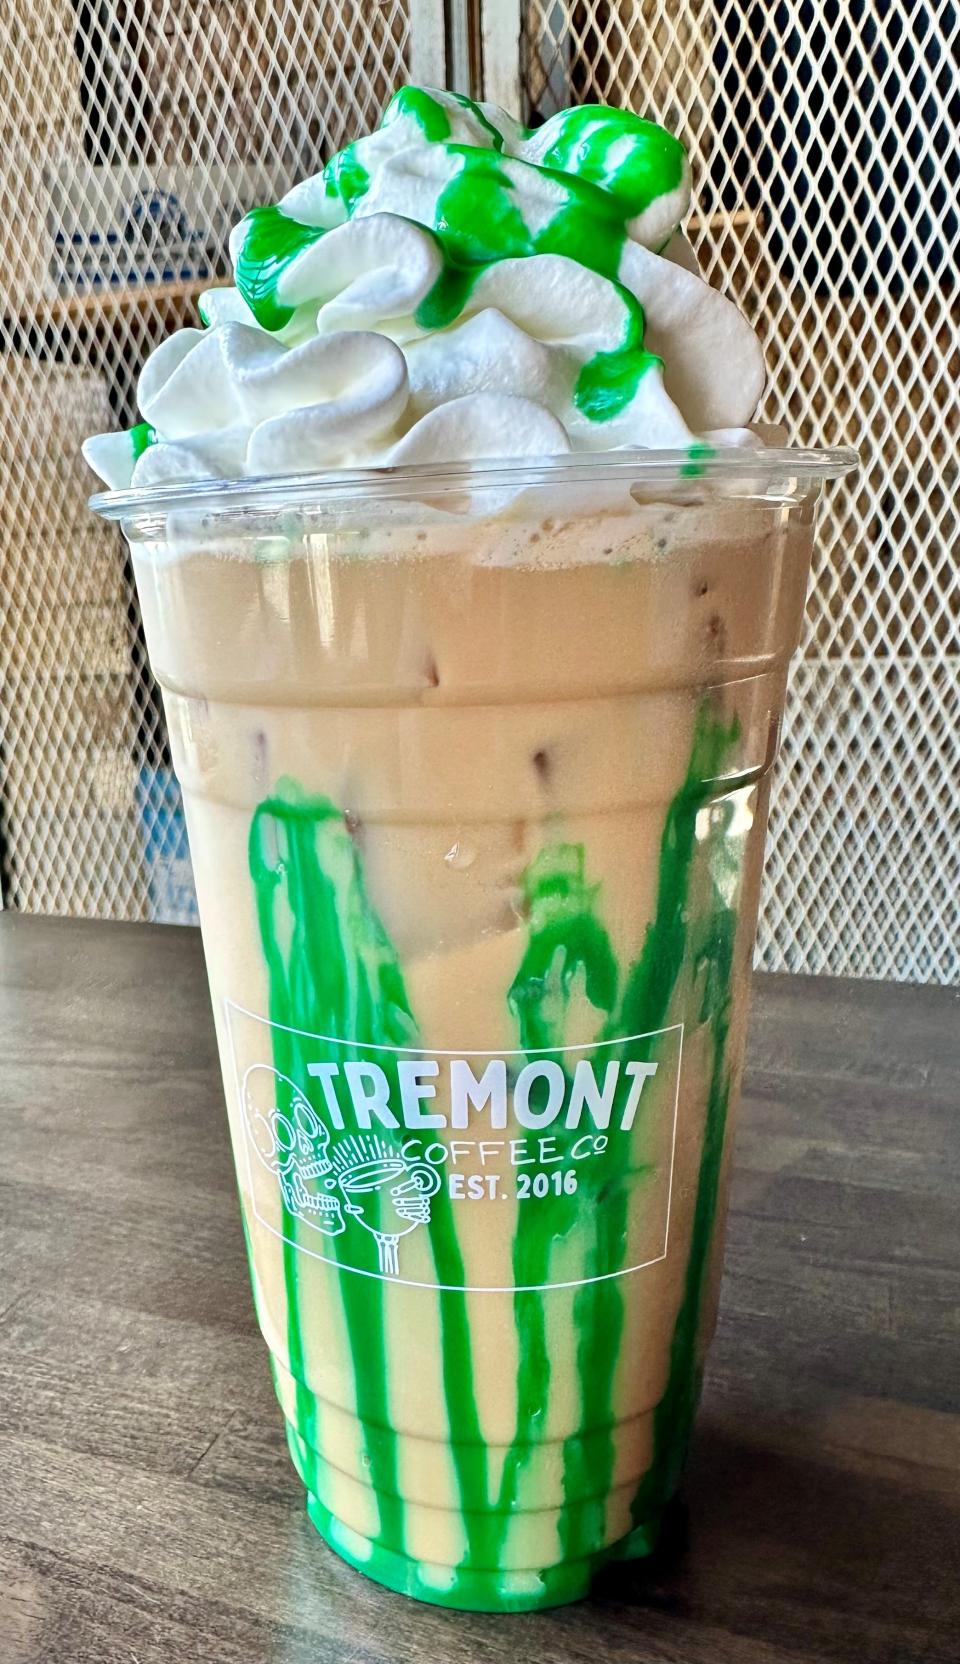 Shamrock Mmoonshine from Tremont Coffee Co., pictured served cold with nitro cold brew coffee, white chocolate peppermint infused with white or dark chocolate and decorated with a green white chocolate drizzle.